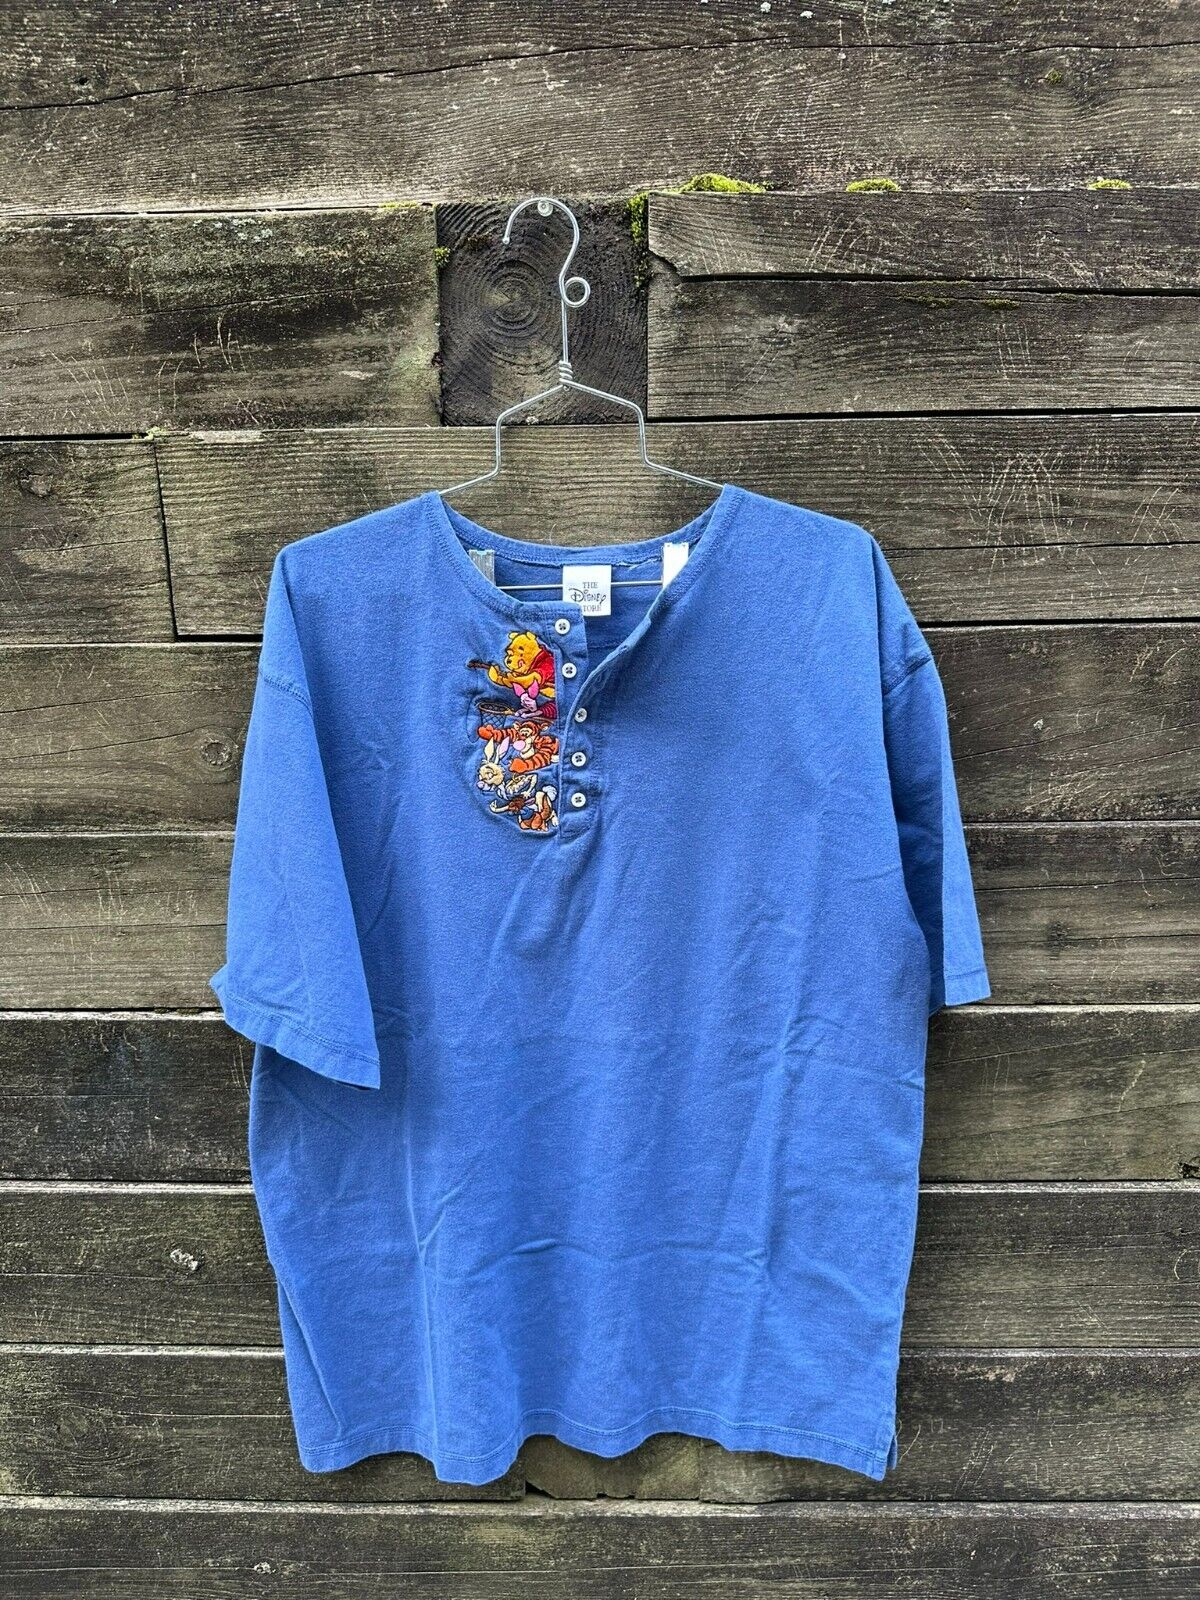 DISNEY Store EMBROIDERED winnie the pooh Buttom shirt size XL